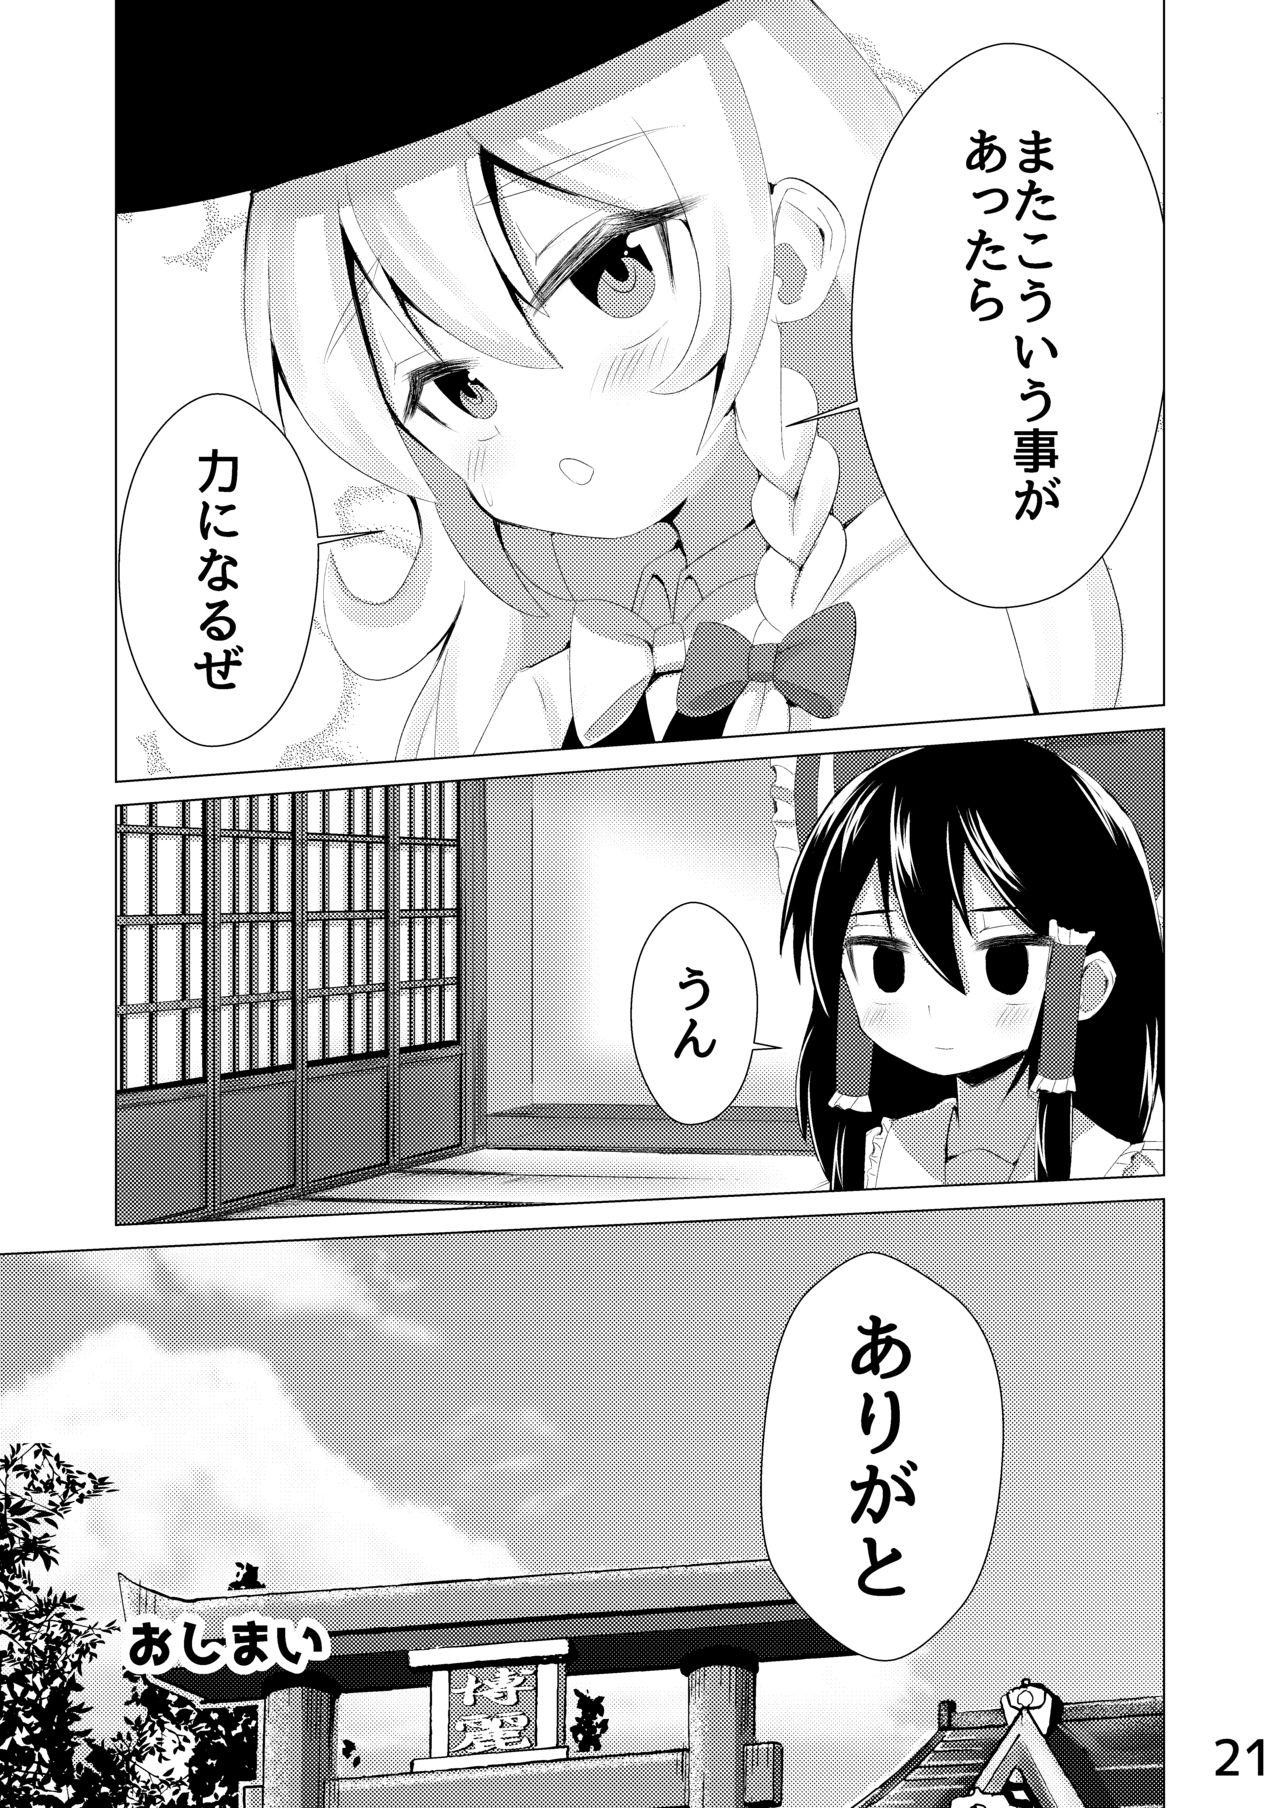 Pervert [NO相撲KING (吸斬) 生えた (Touhou Project) [Digital] - Touhou project Dicksucking - Page 22